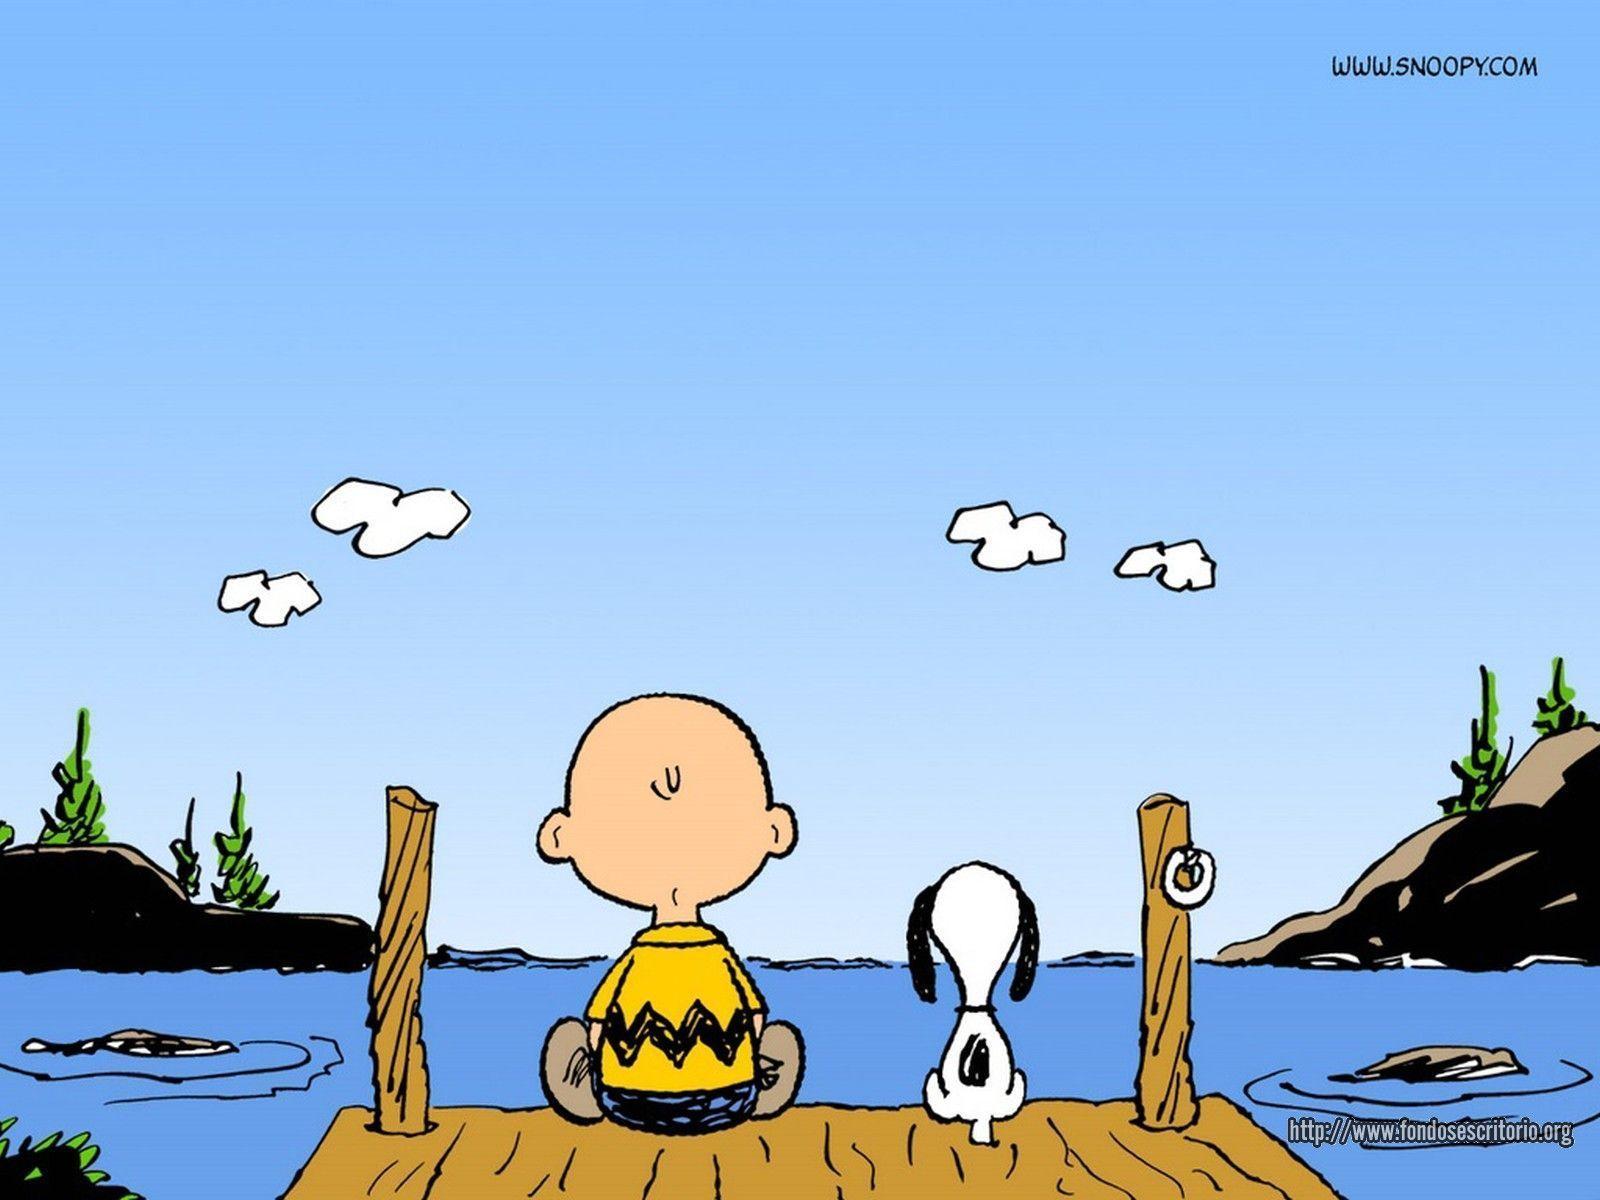 Snoopy peanuts desktop wallpaper. wallpaper picture and image